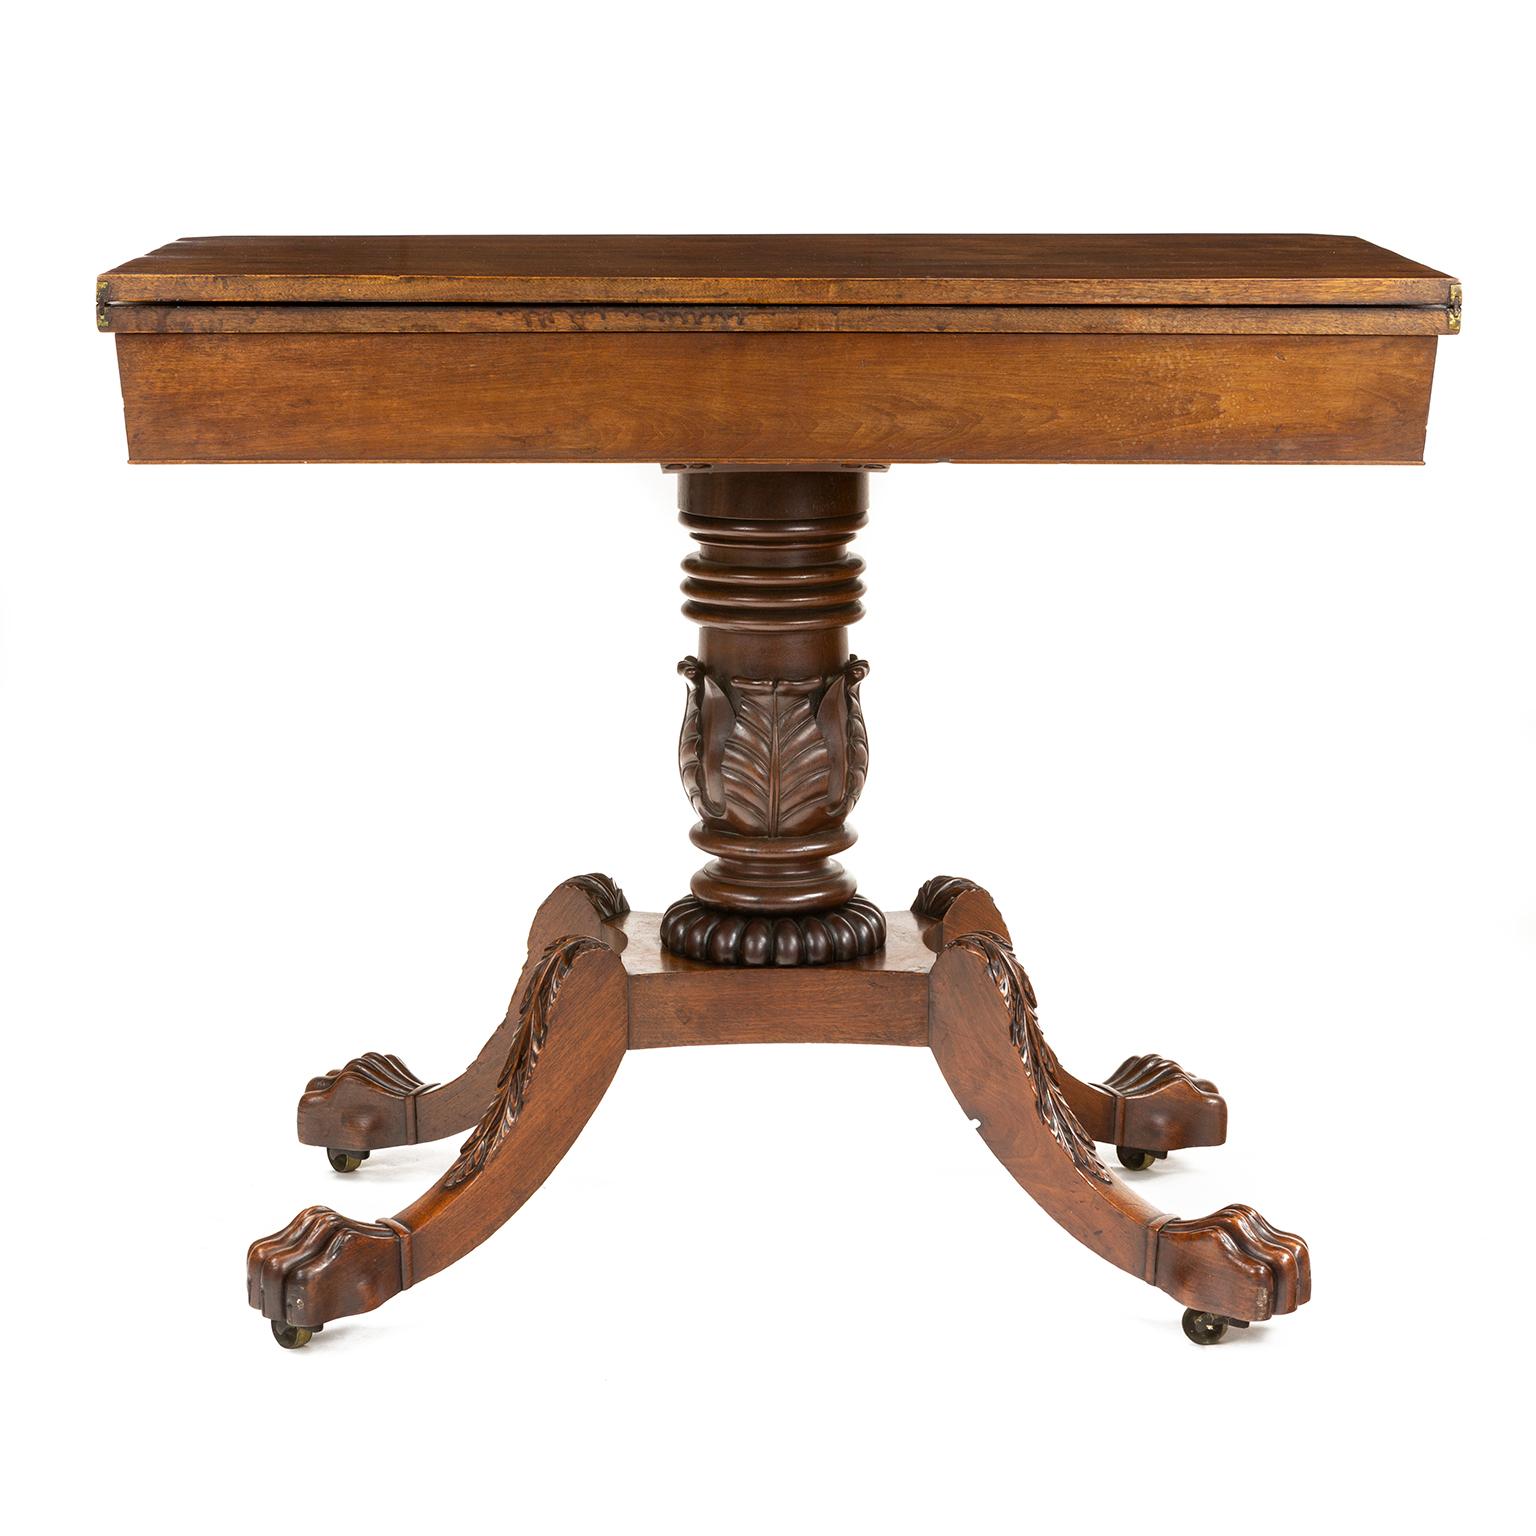 Early 19th Century Gillows Rosewood Tea Table